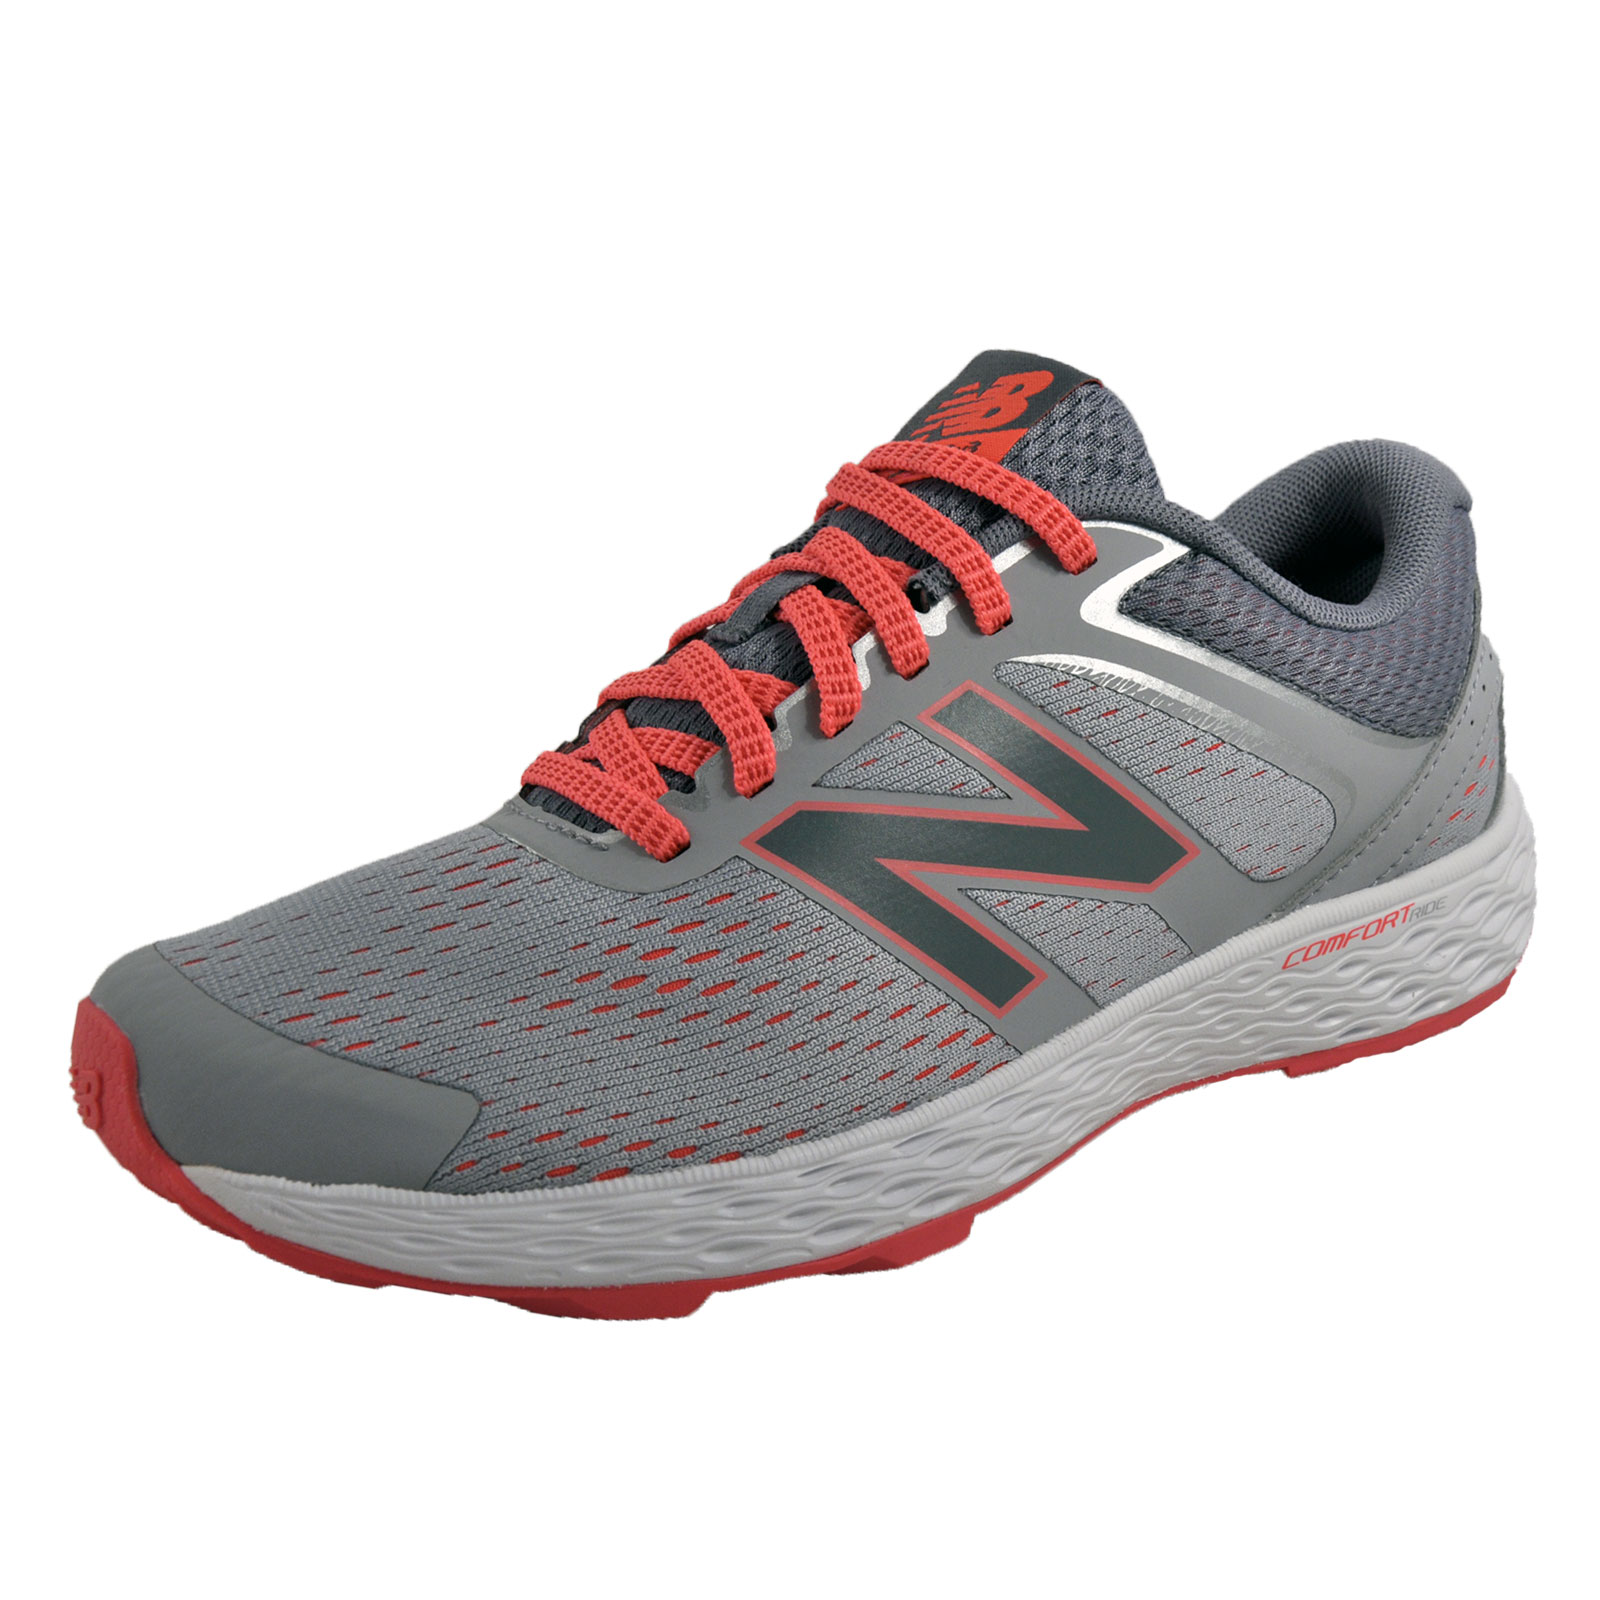 New Balance 520 v3 Womens Comfort Ride Running Shoes Fitness Trainers ...